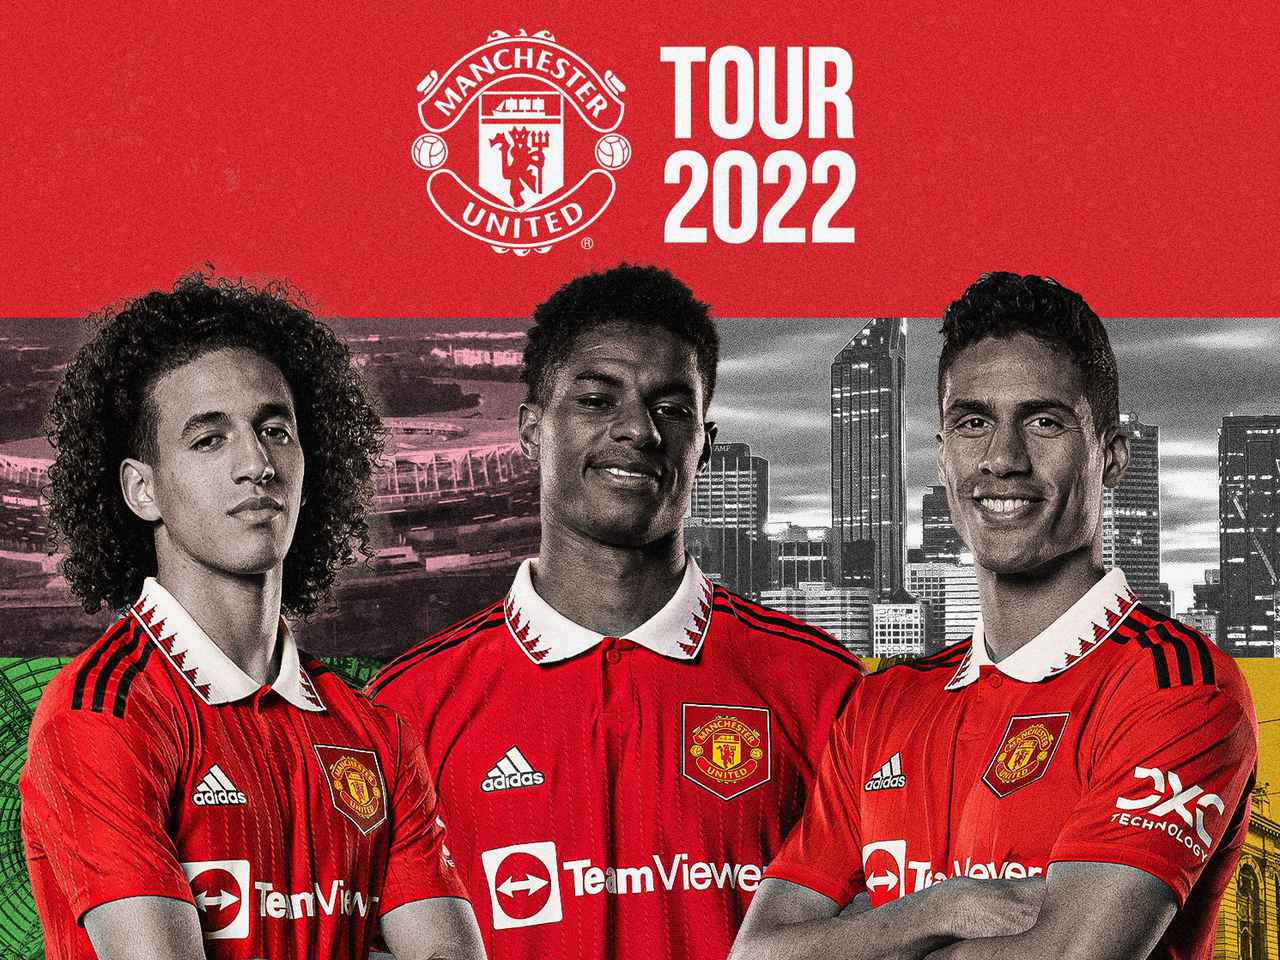 Man Utd Tour 2022 squad officially announced